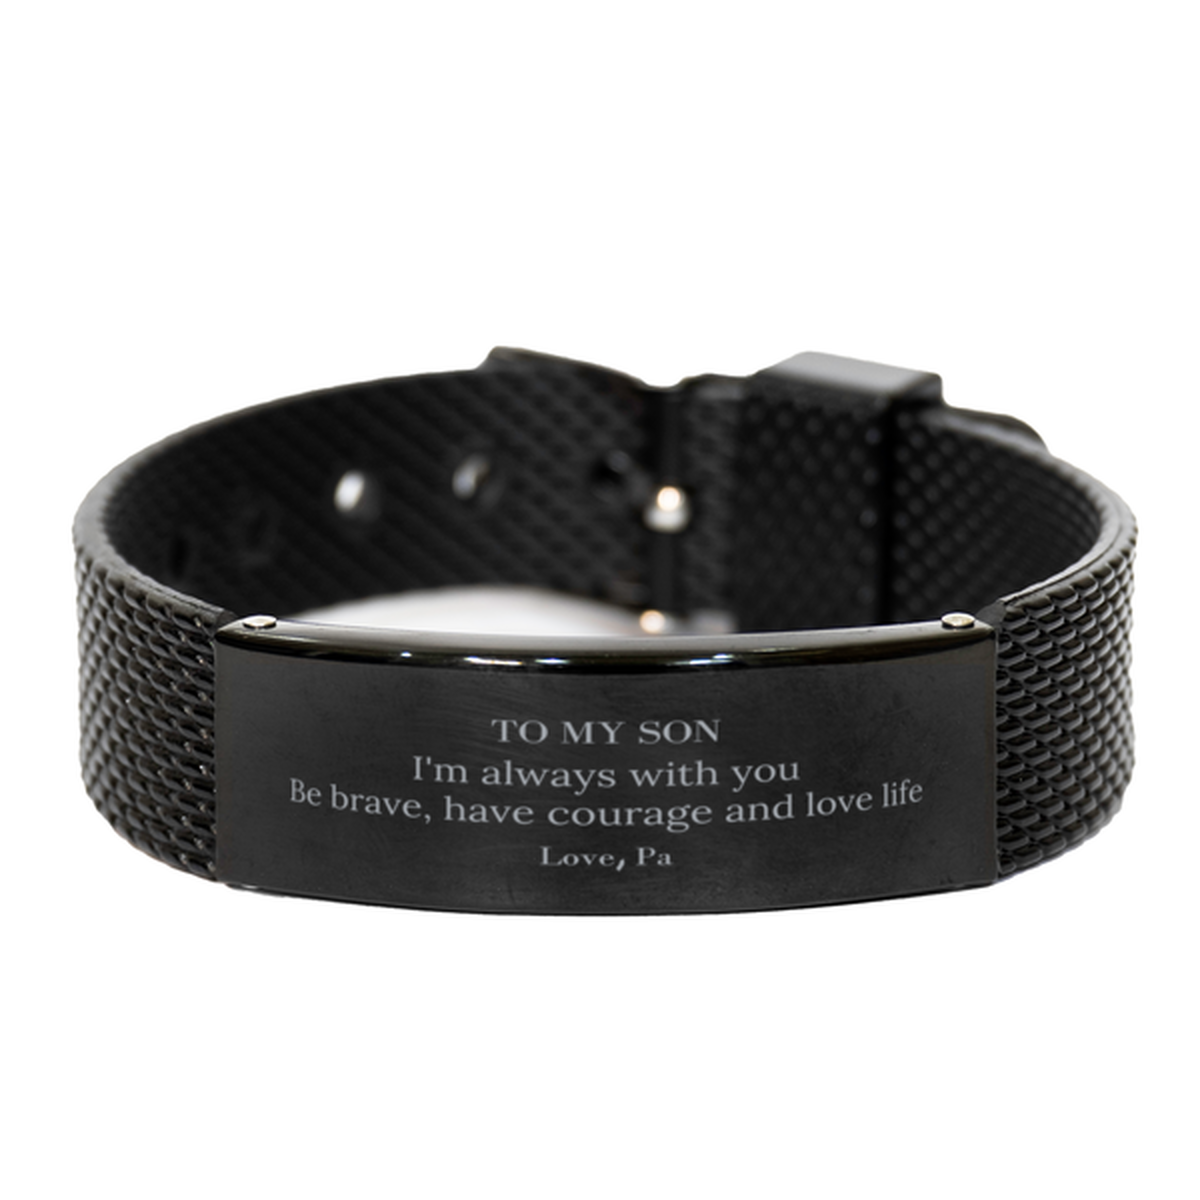 To My Son Gifts from Pa, Unique Black Shark Mesh Bracelet Inspirational Christmas Birthday Graduation Gifts for Son I'm always with you. Be brave, have courage and love life. Love, Pa